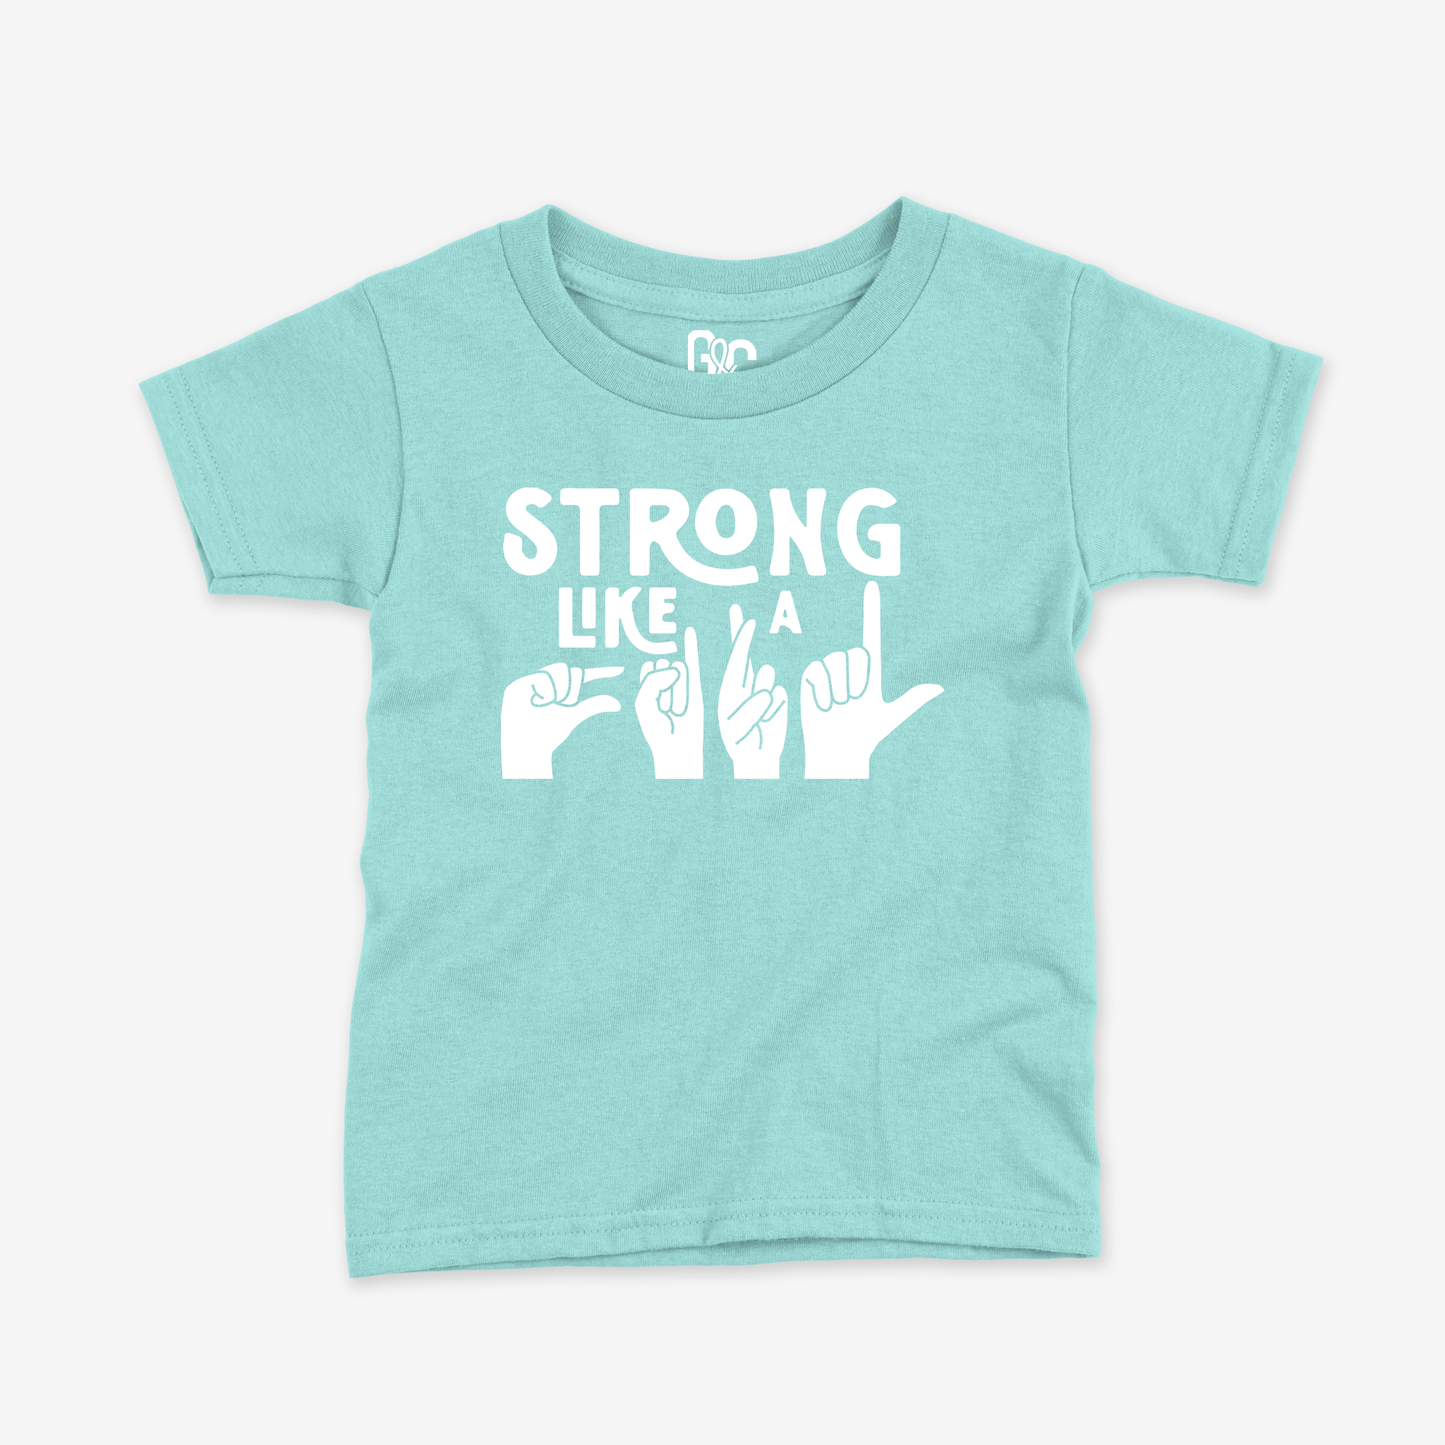 Strong Like a Girl Toddler Tee